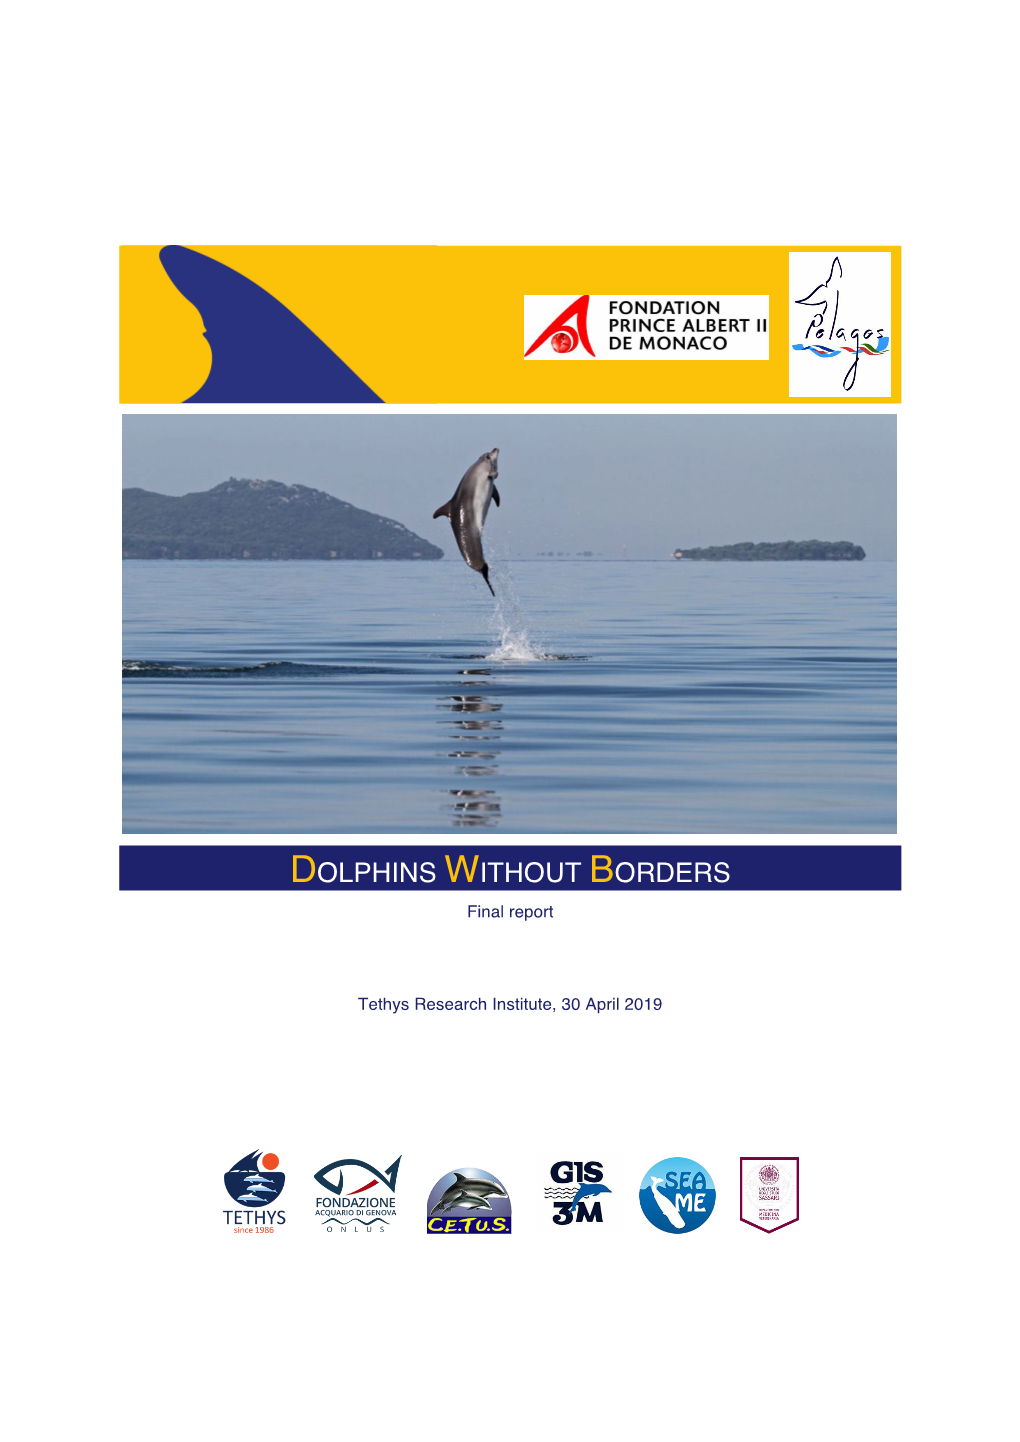 DOLPHINS WITHOUT BORDERS Final Report